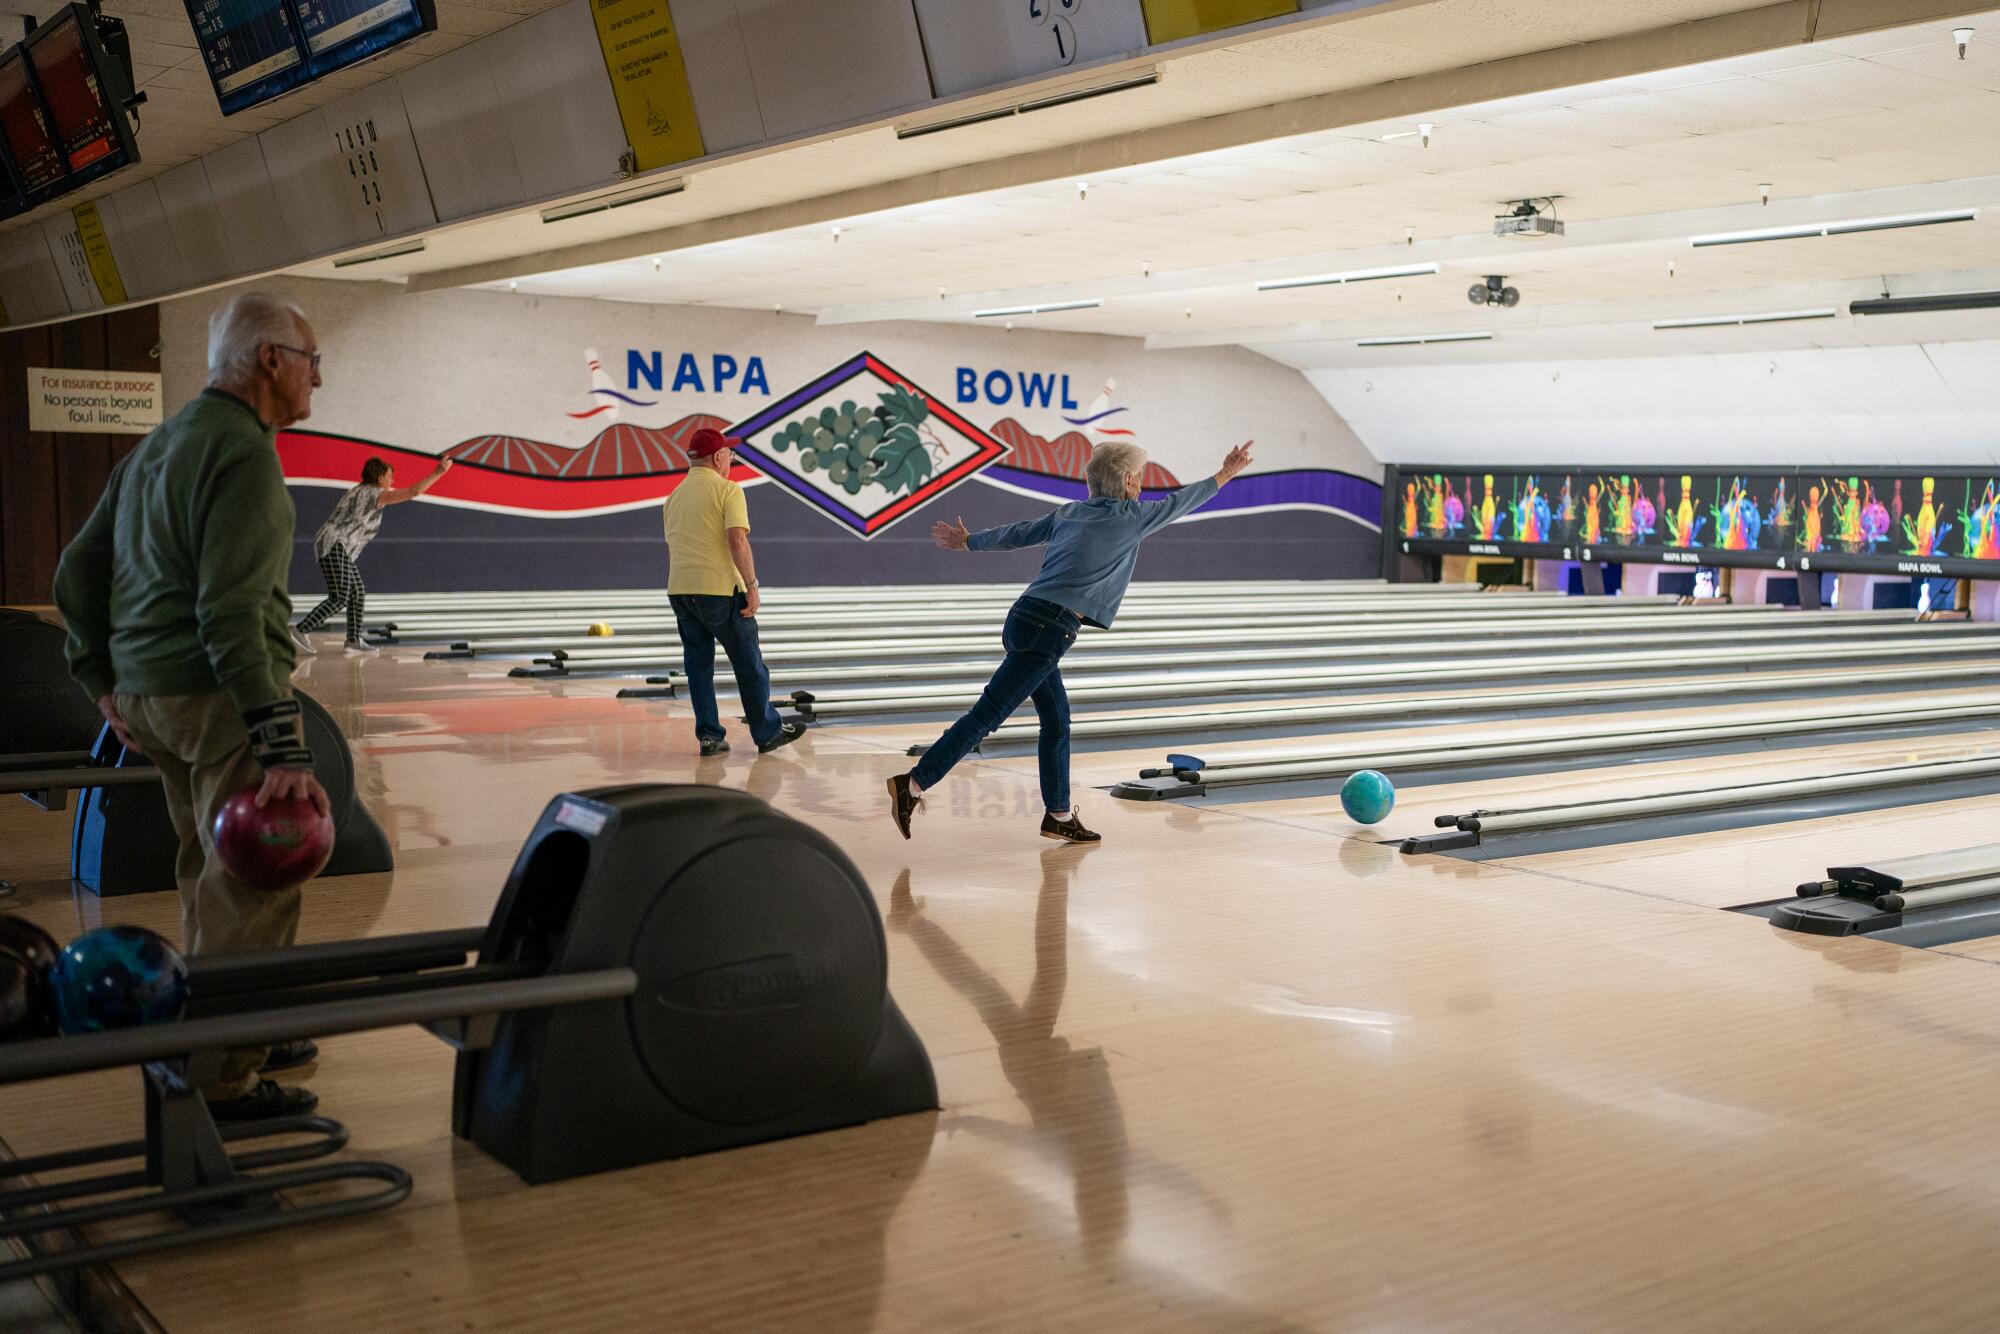 Members of an adult bowling league compete at Napa Bowl bowling alley on Oct. 27 in Napa